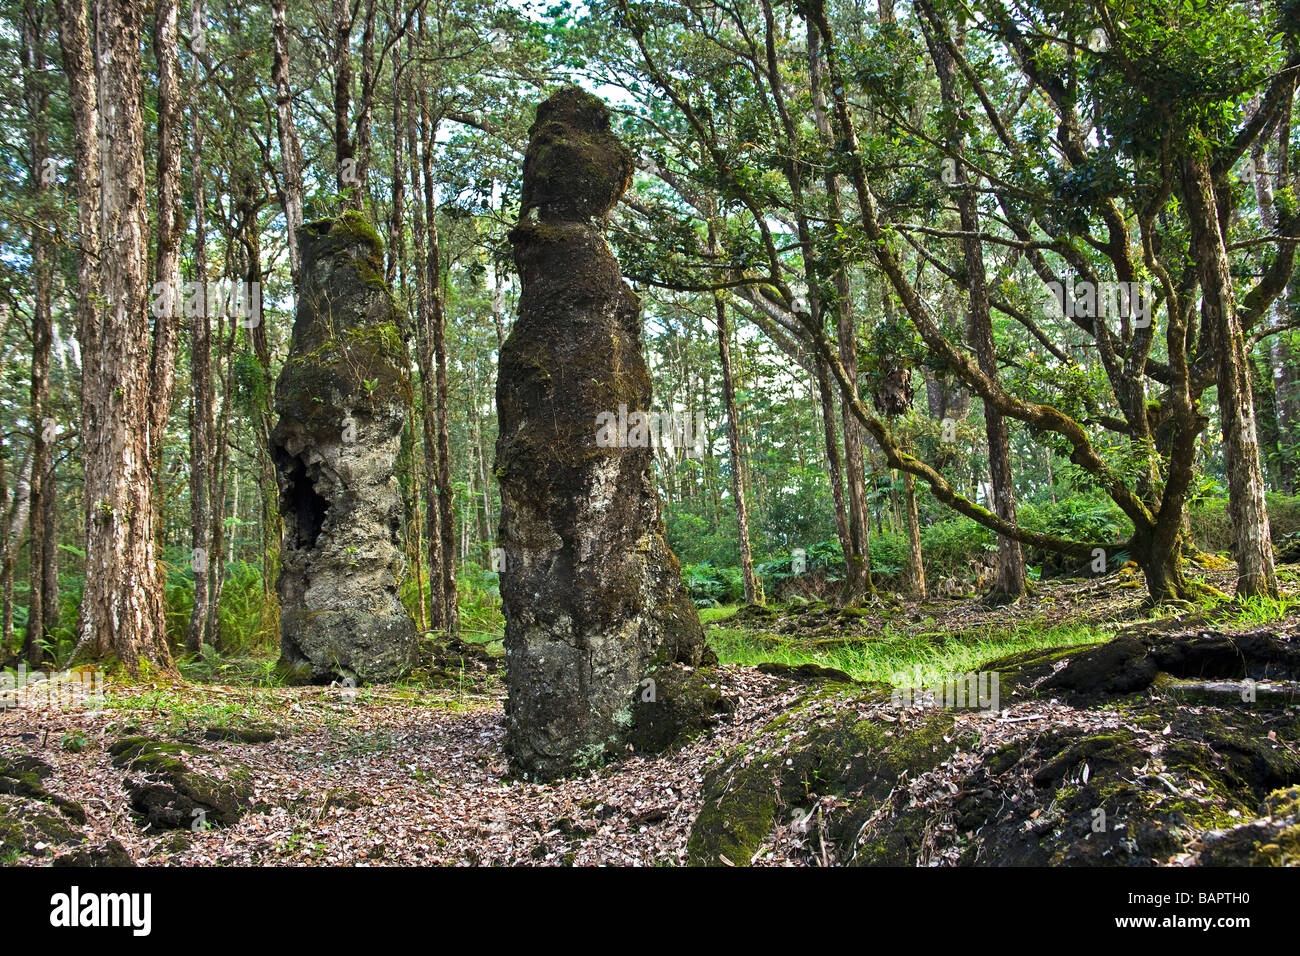 Lava Tree Casts standing in forest. Stock Photo